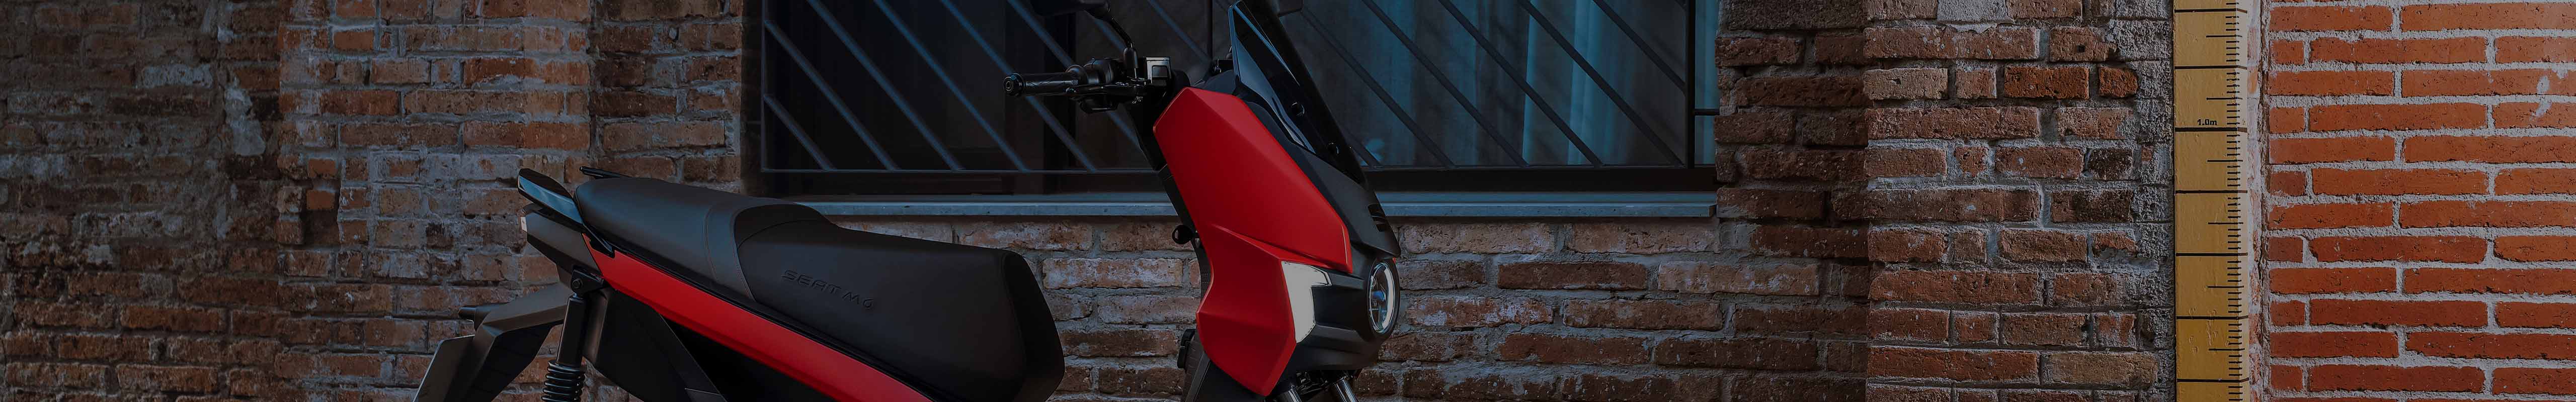 SEAT Mo electric scooter side view in red and black urban mobility